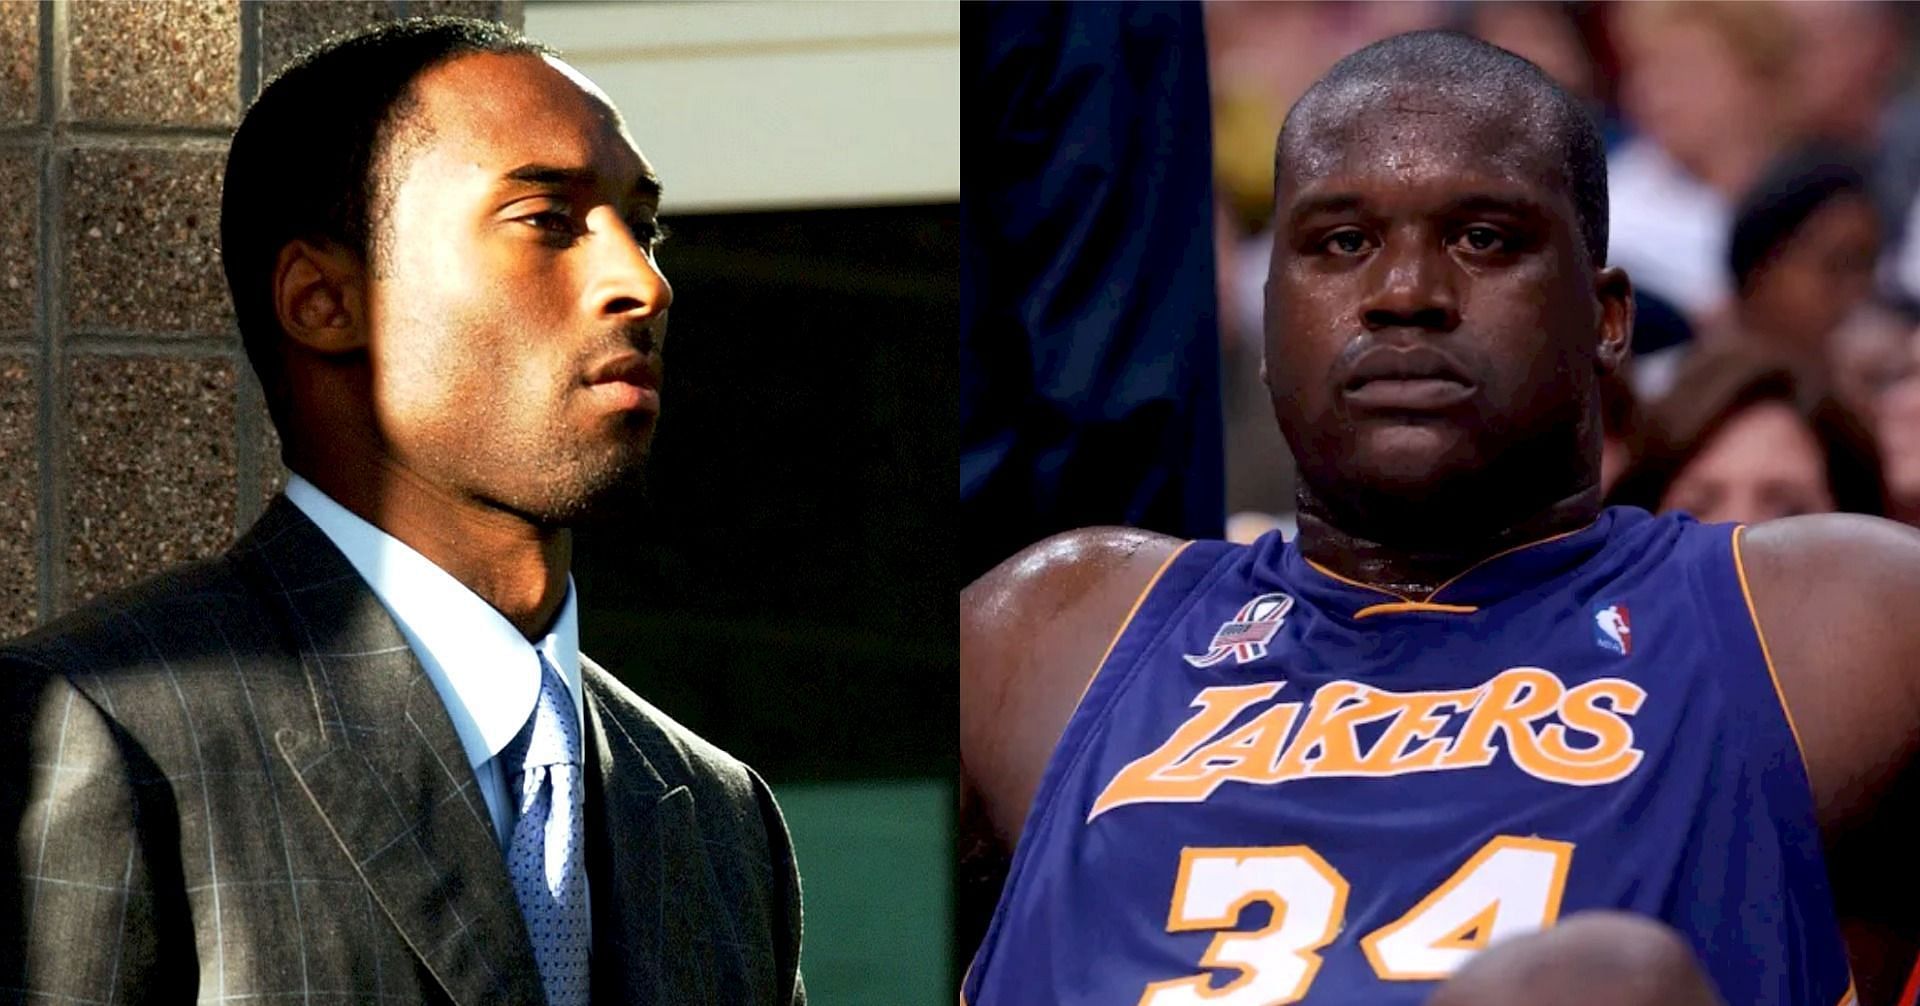 LA Lakers legends Kobe Bryant and Shaquille O&rsquo;Neal